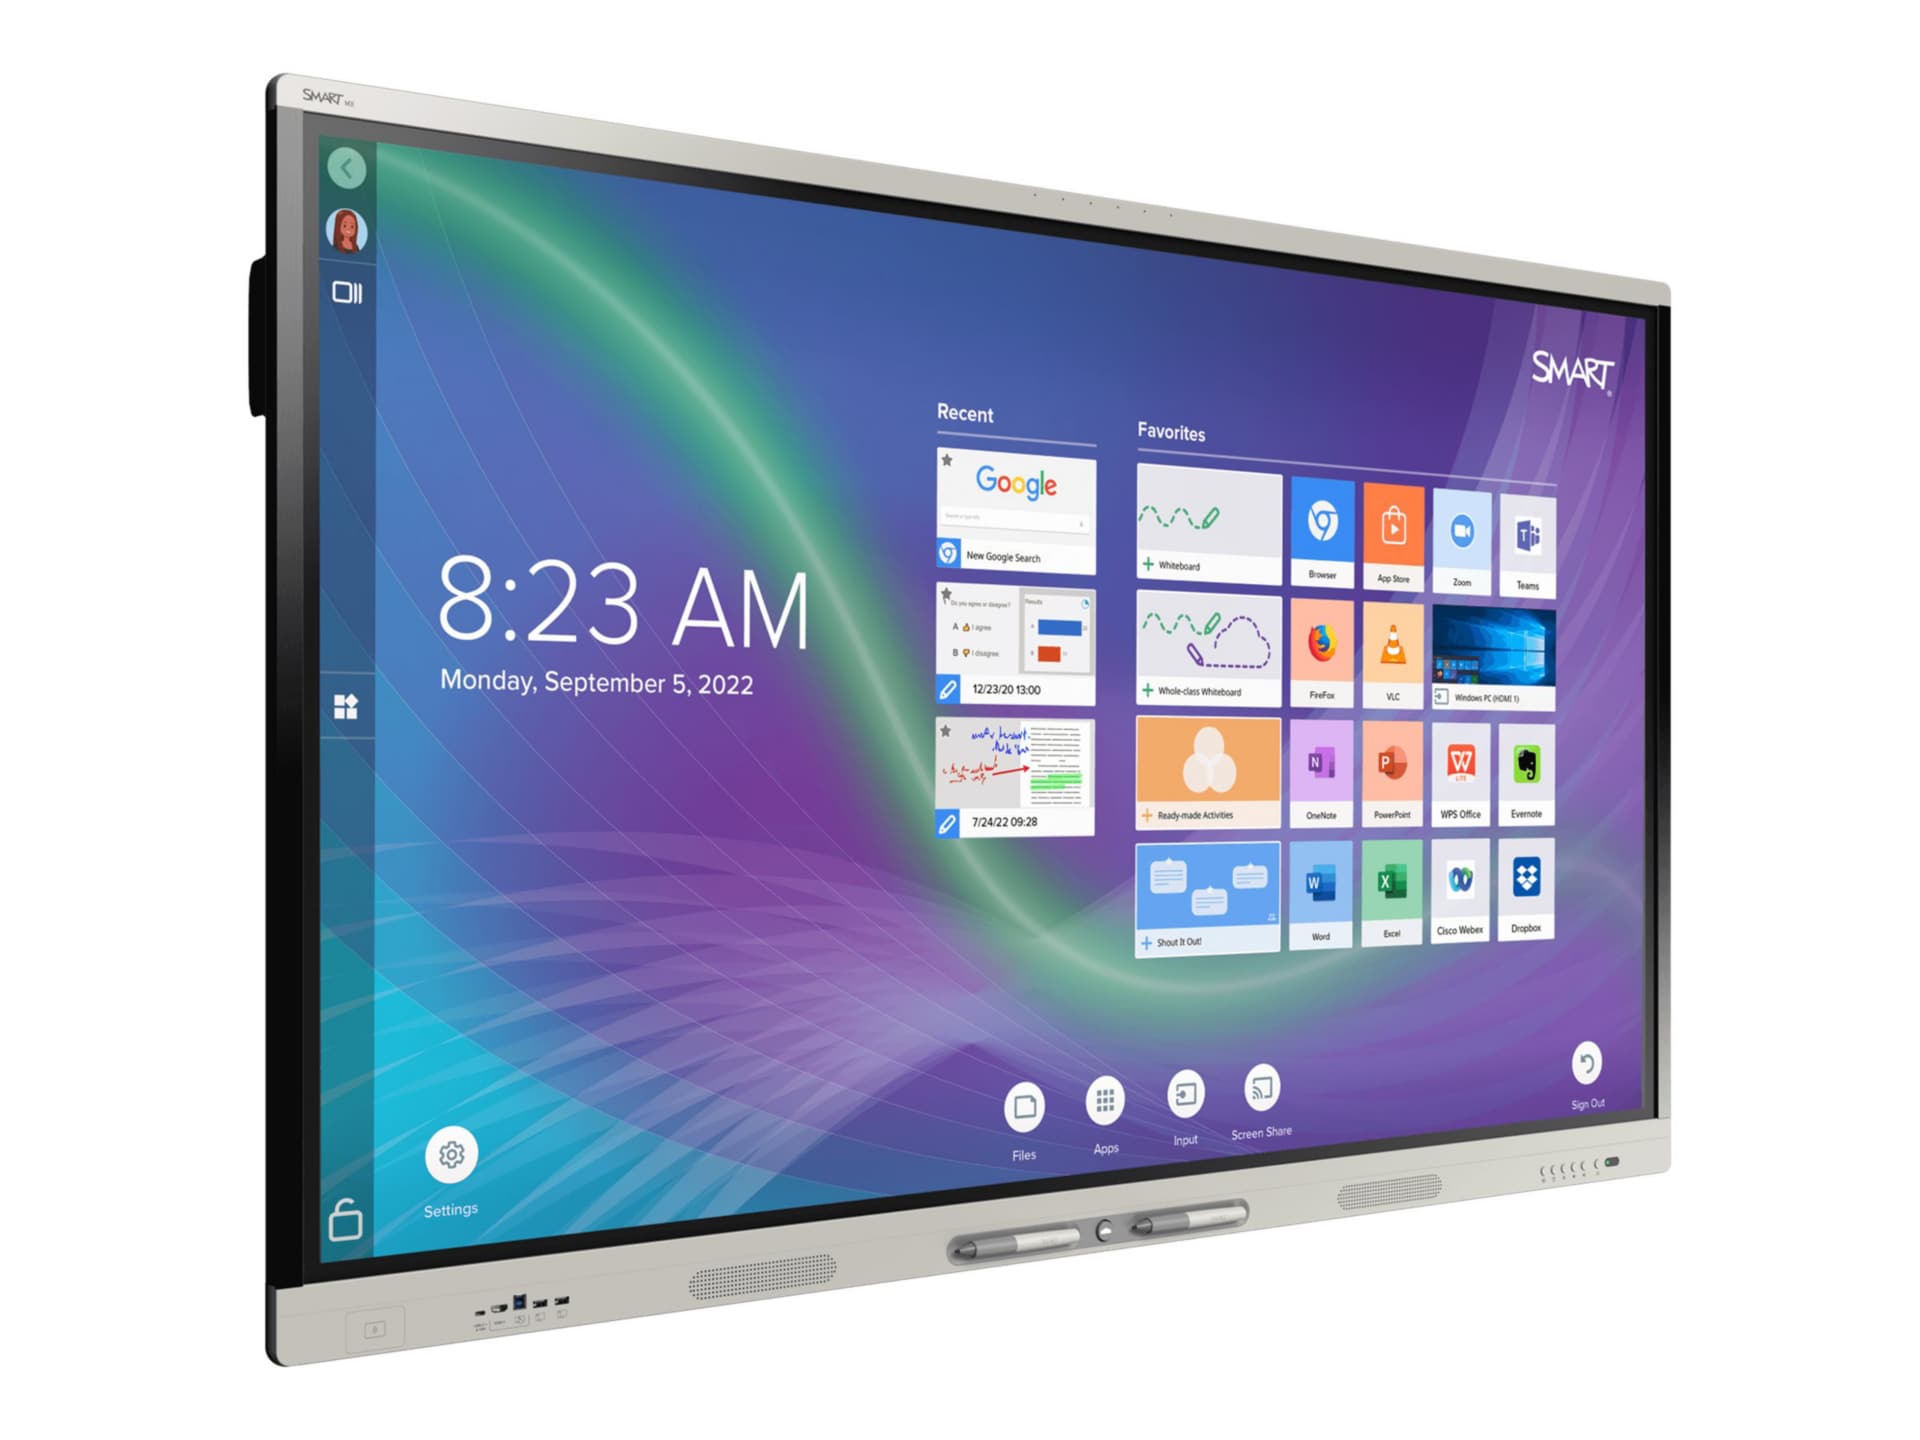 SMART Board SBID-MX255-V4-PW MX Pro (V4) Series with iQ - 55" LED-backlit LCD display - 4K - for interactive